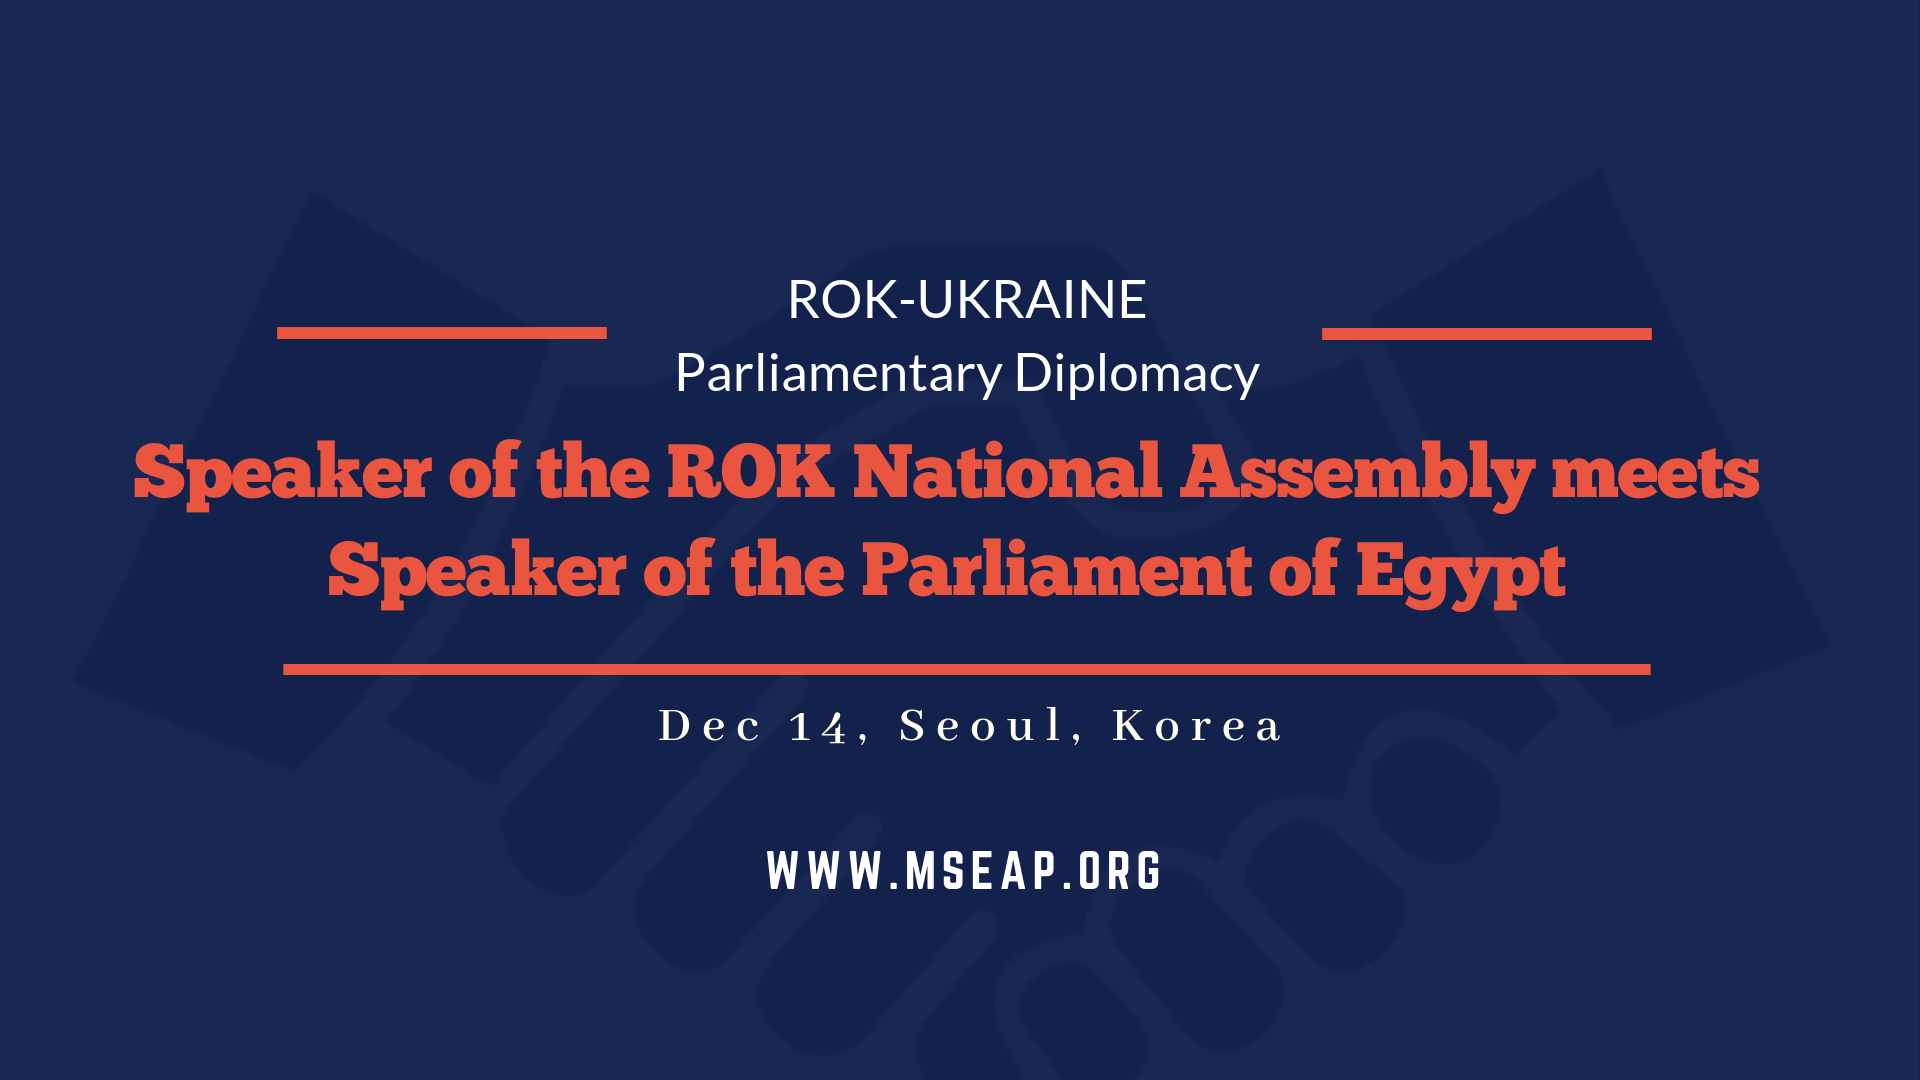 Speaker of the ROK National Assembly receives an official visit from the speaker of the Egyptian Parliament